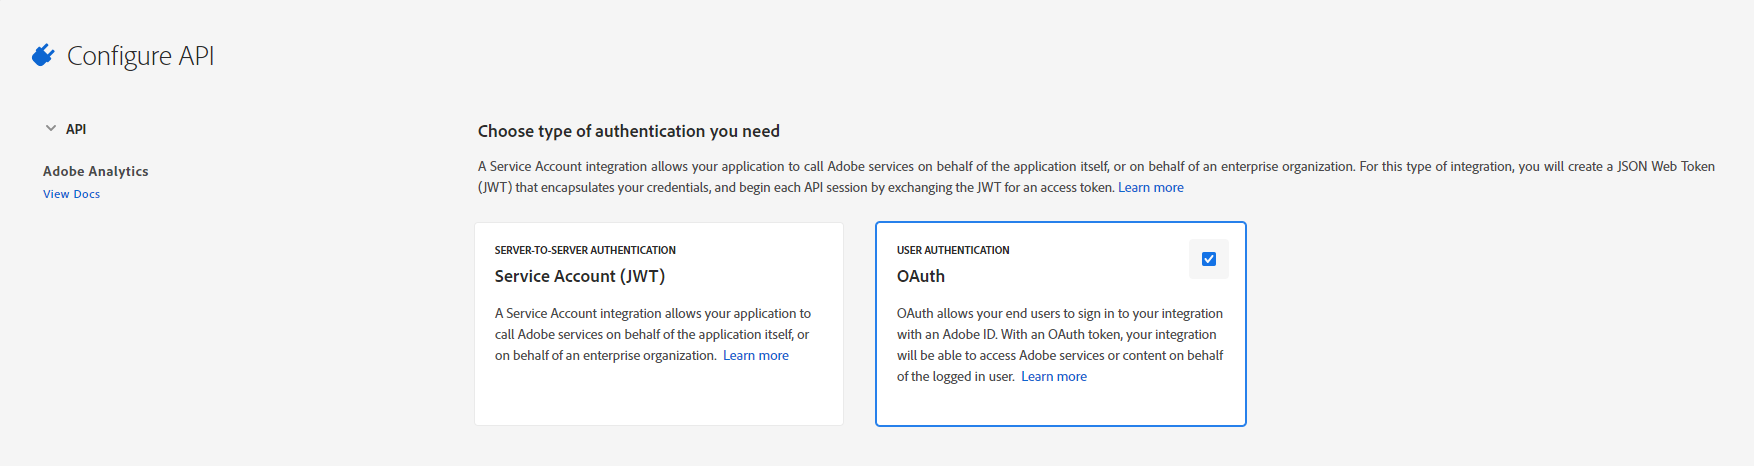 Choose OAuth for authentication type